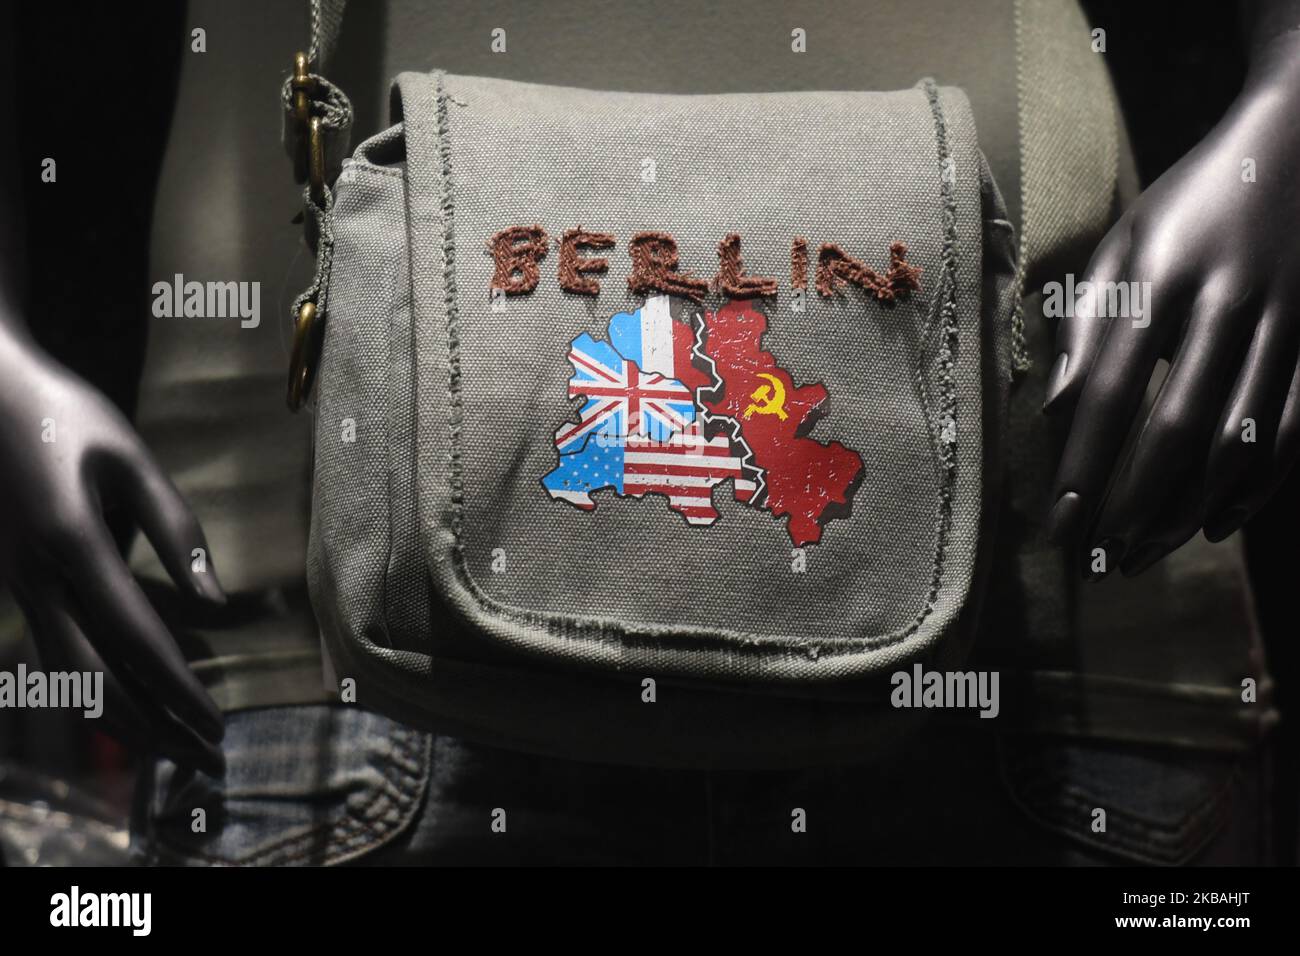 A bag with an image of divided Berlin areas between Allied Forces and the Soviet Union, seen on the day of the official ceremony of the 30th anniversary of the fall of the Berlin Wall, at Berlin Wall Memorial in Bernauer Strasse. On Saturday, November 9, 2019, in Berlin, Germany. (Photo by Artur Widak/NurPhoto) Stock Photo